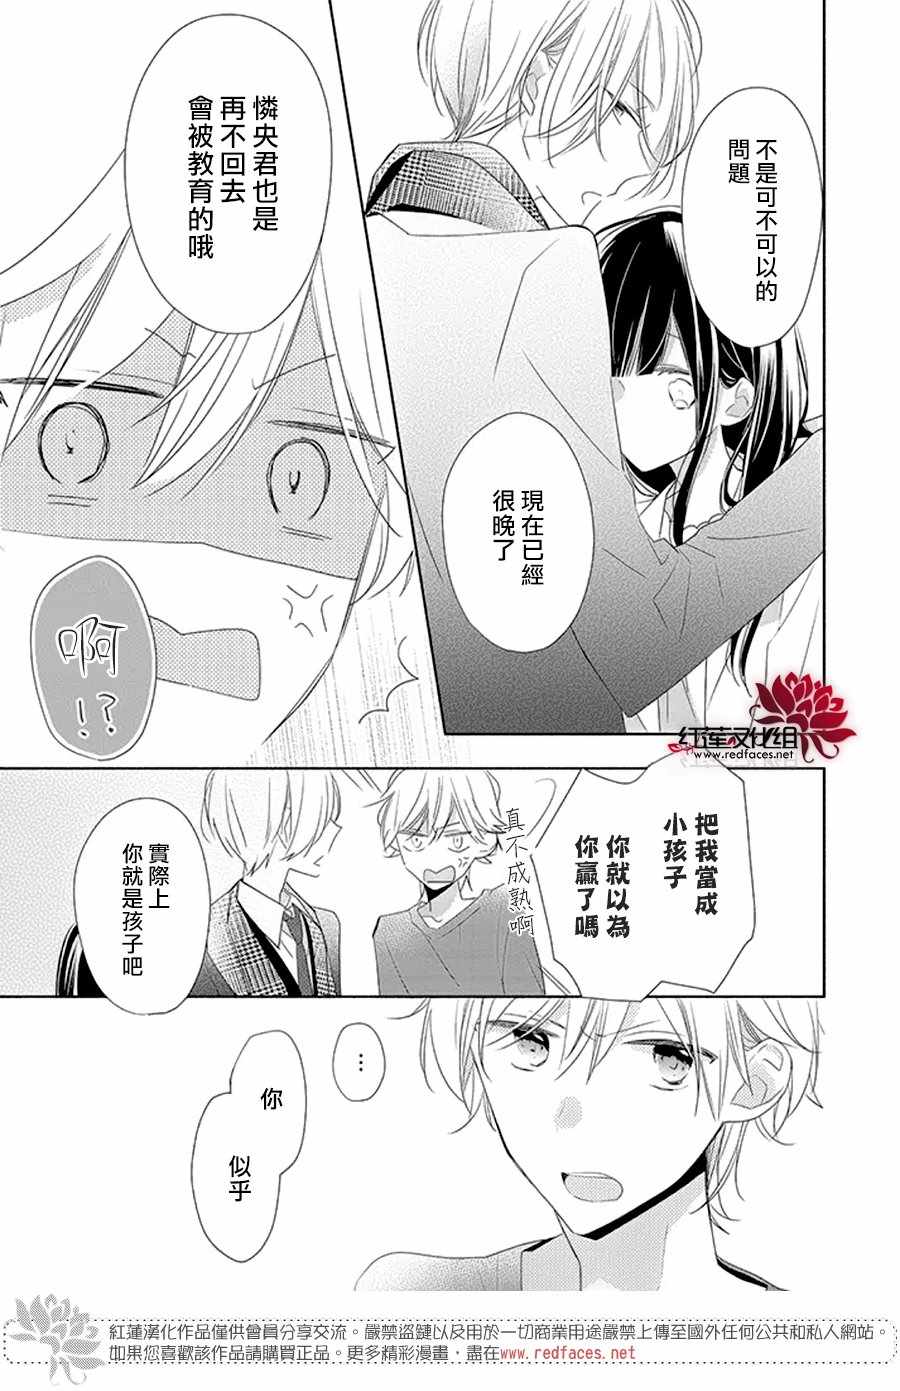 《If given a second chance》漫画 second chance 020集